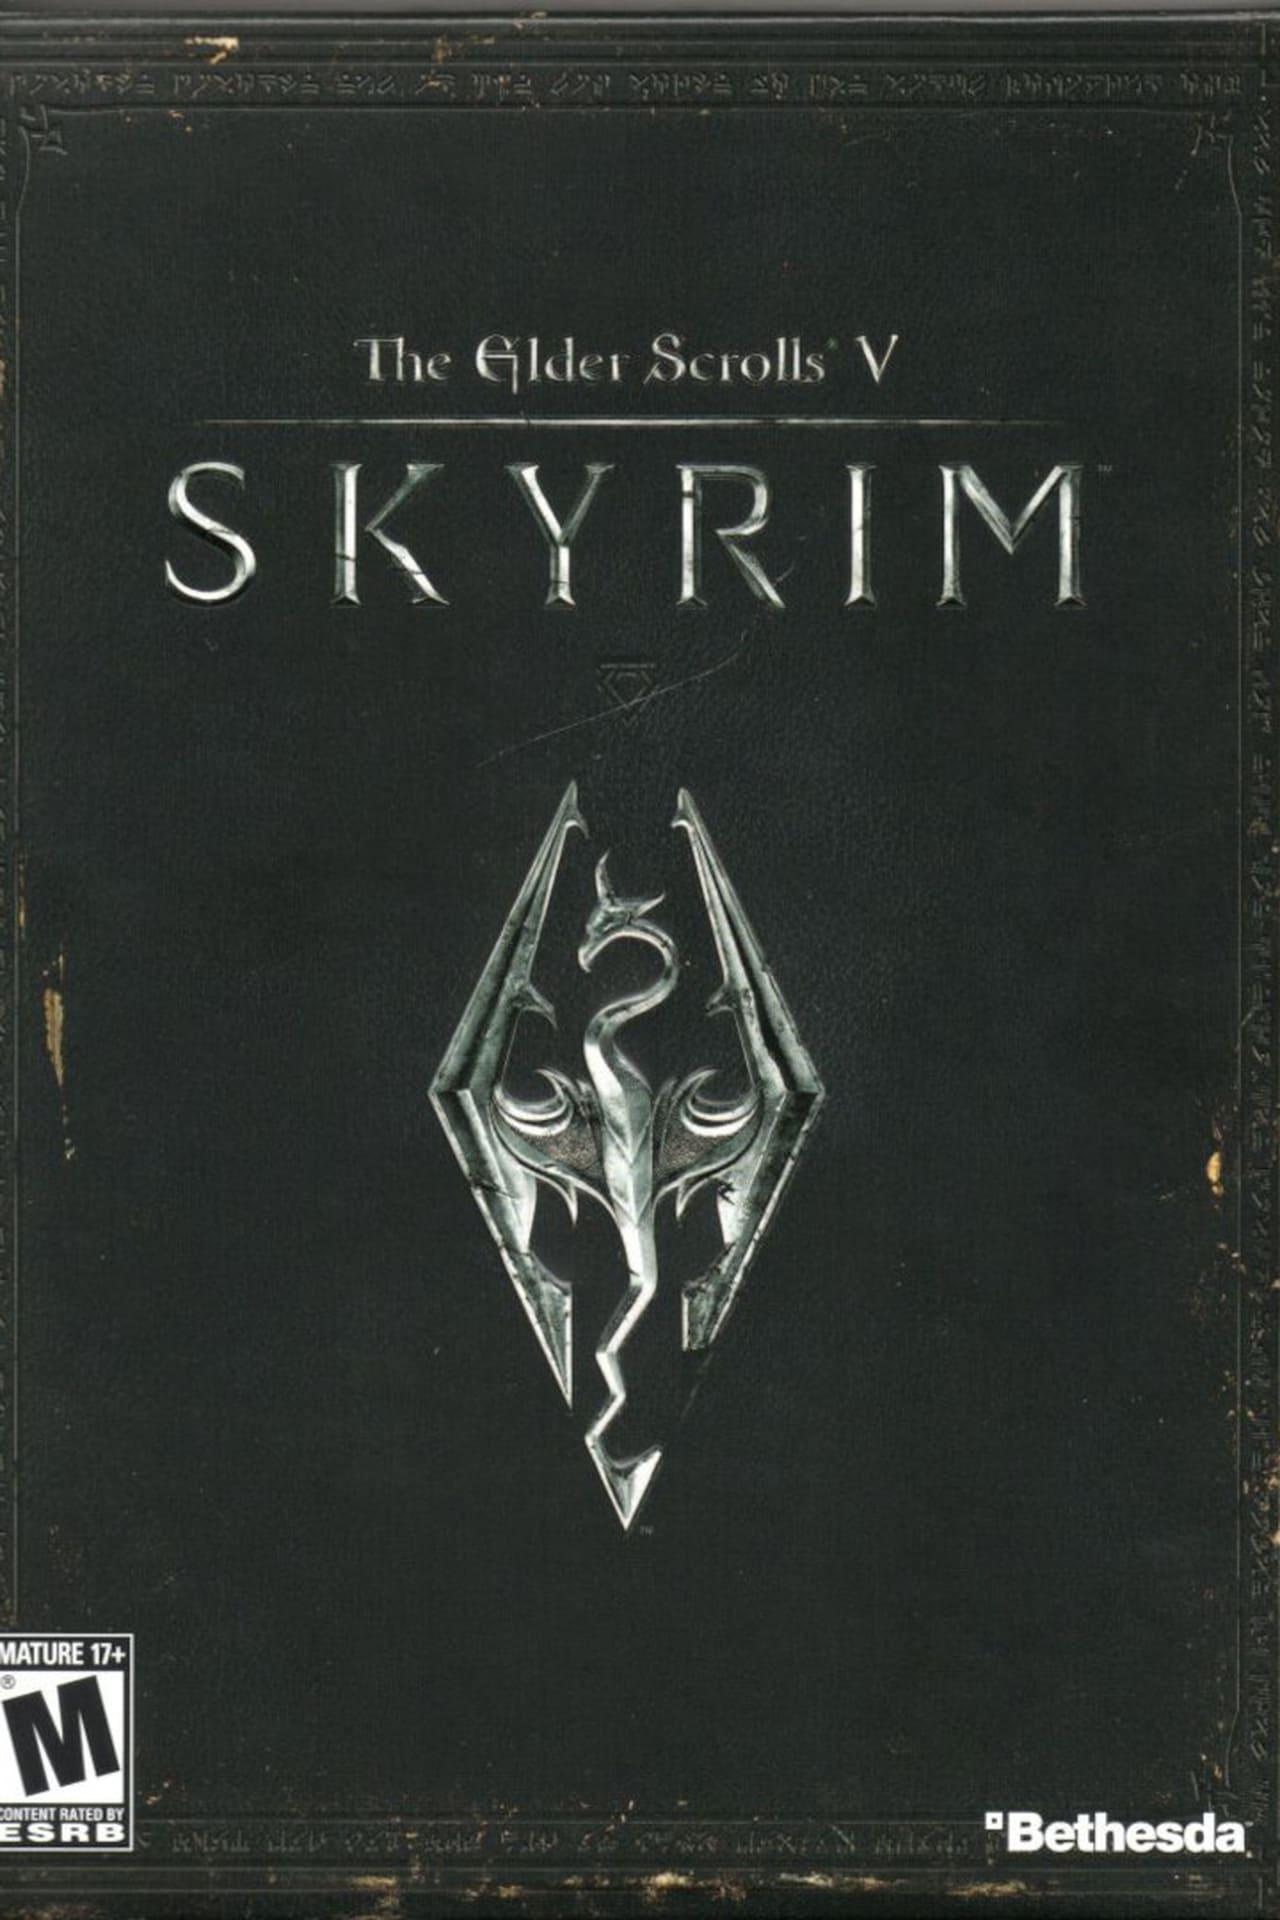 Behind the Wall: The Making of Skyrim poster